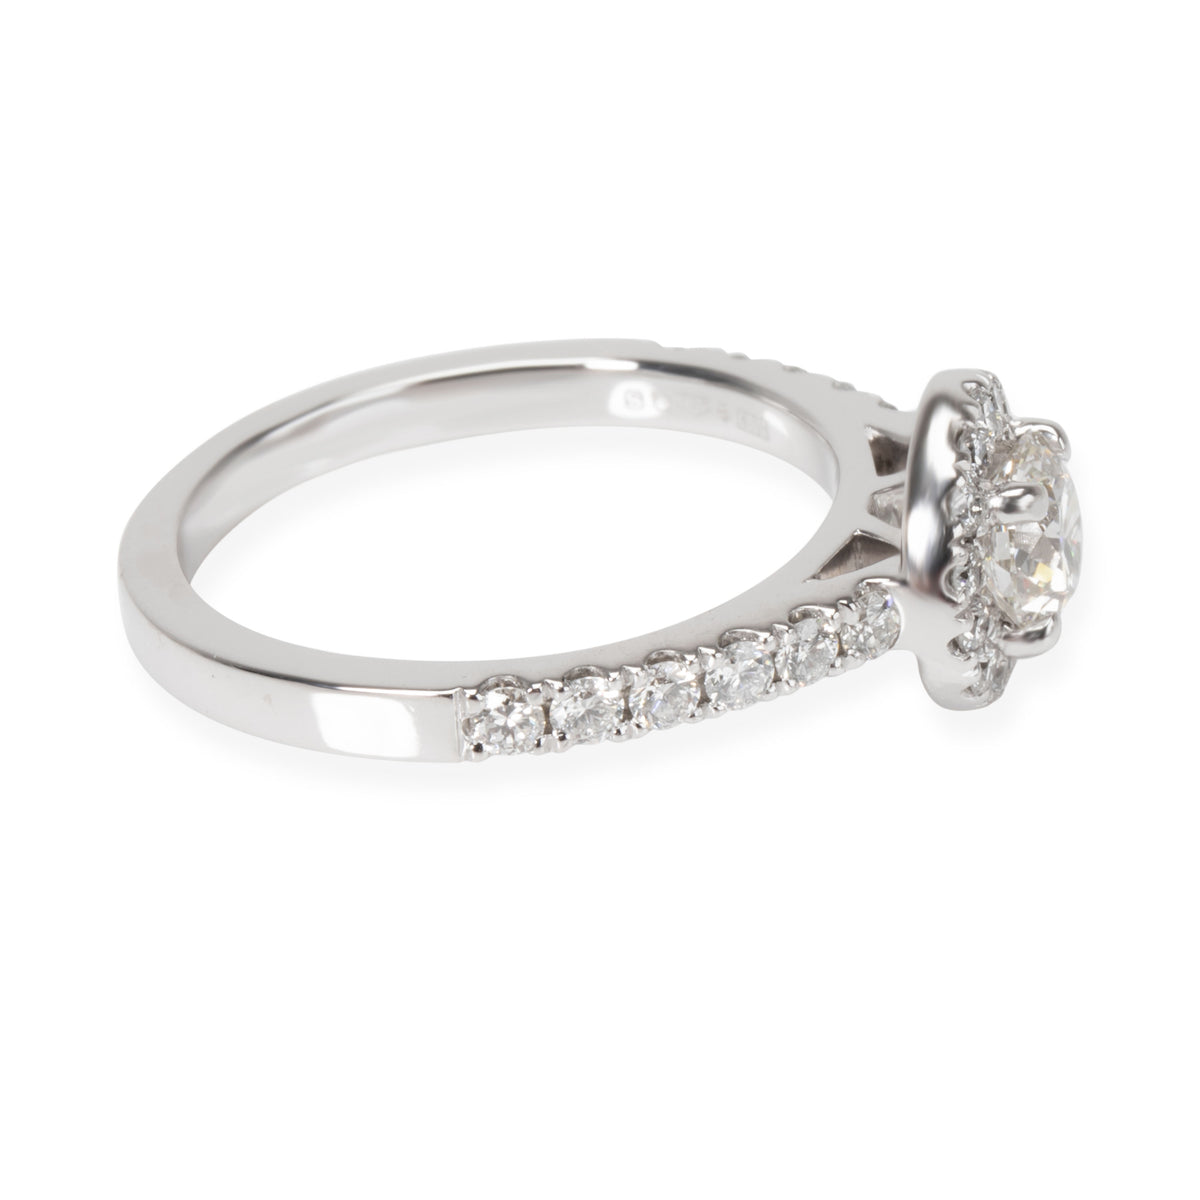 Halo Diamond Engagement Ring in Platinum GIA Certified I IF 0.86 CTW